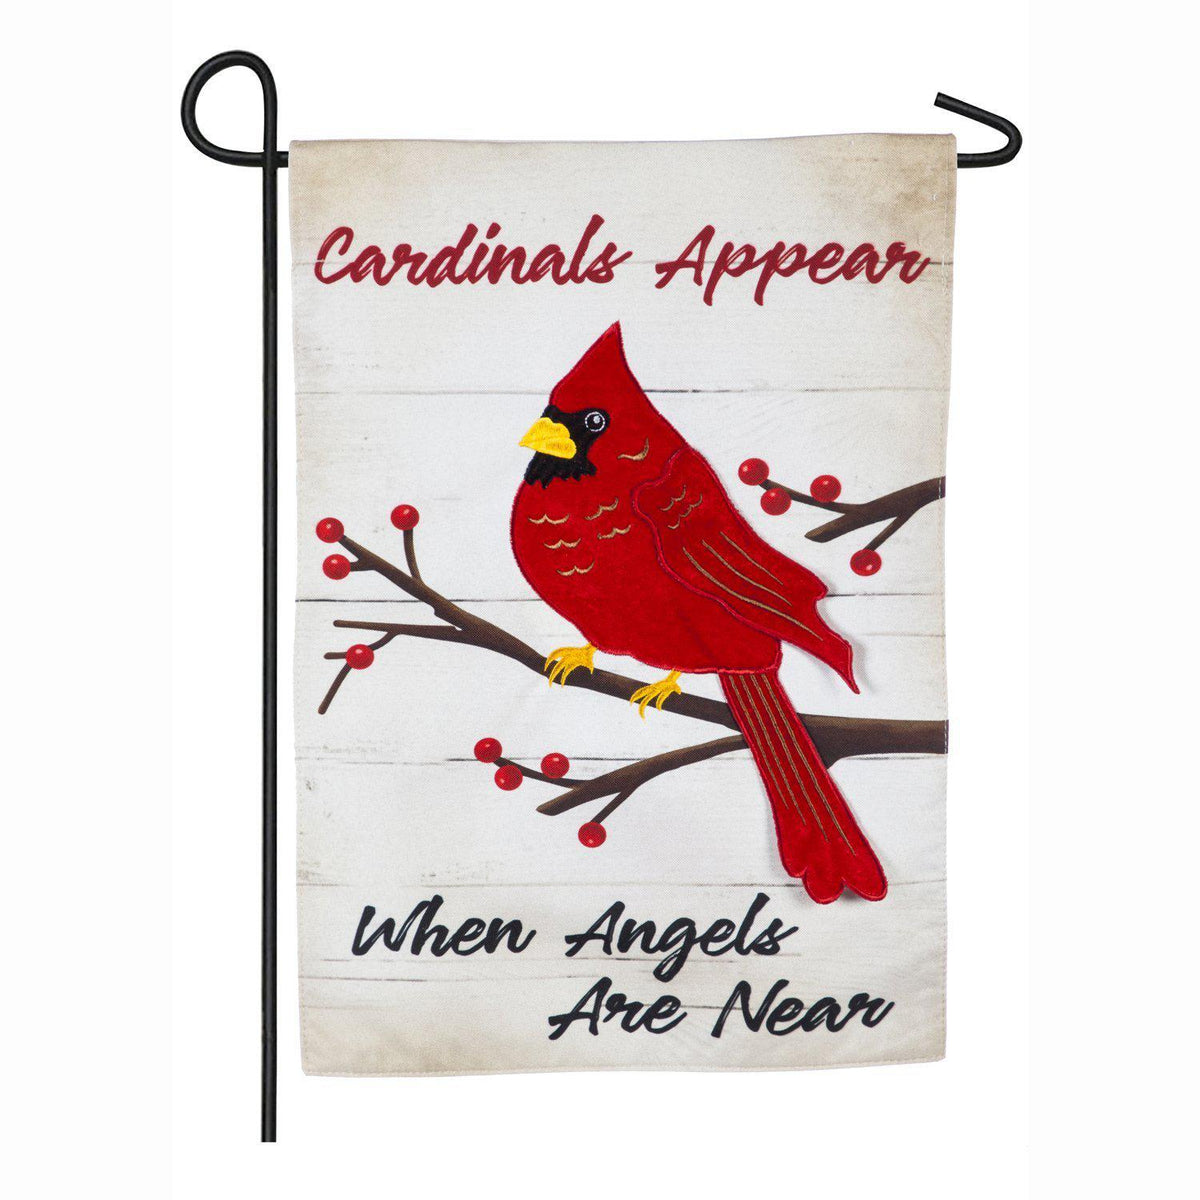 Share the message that "Cardinals Appear When Angels Are Near" with a vibrant 3D cardinal on this garden flag.